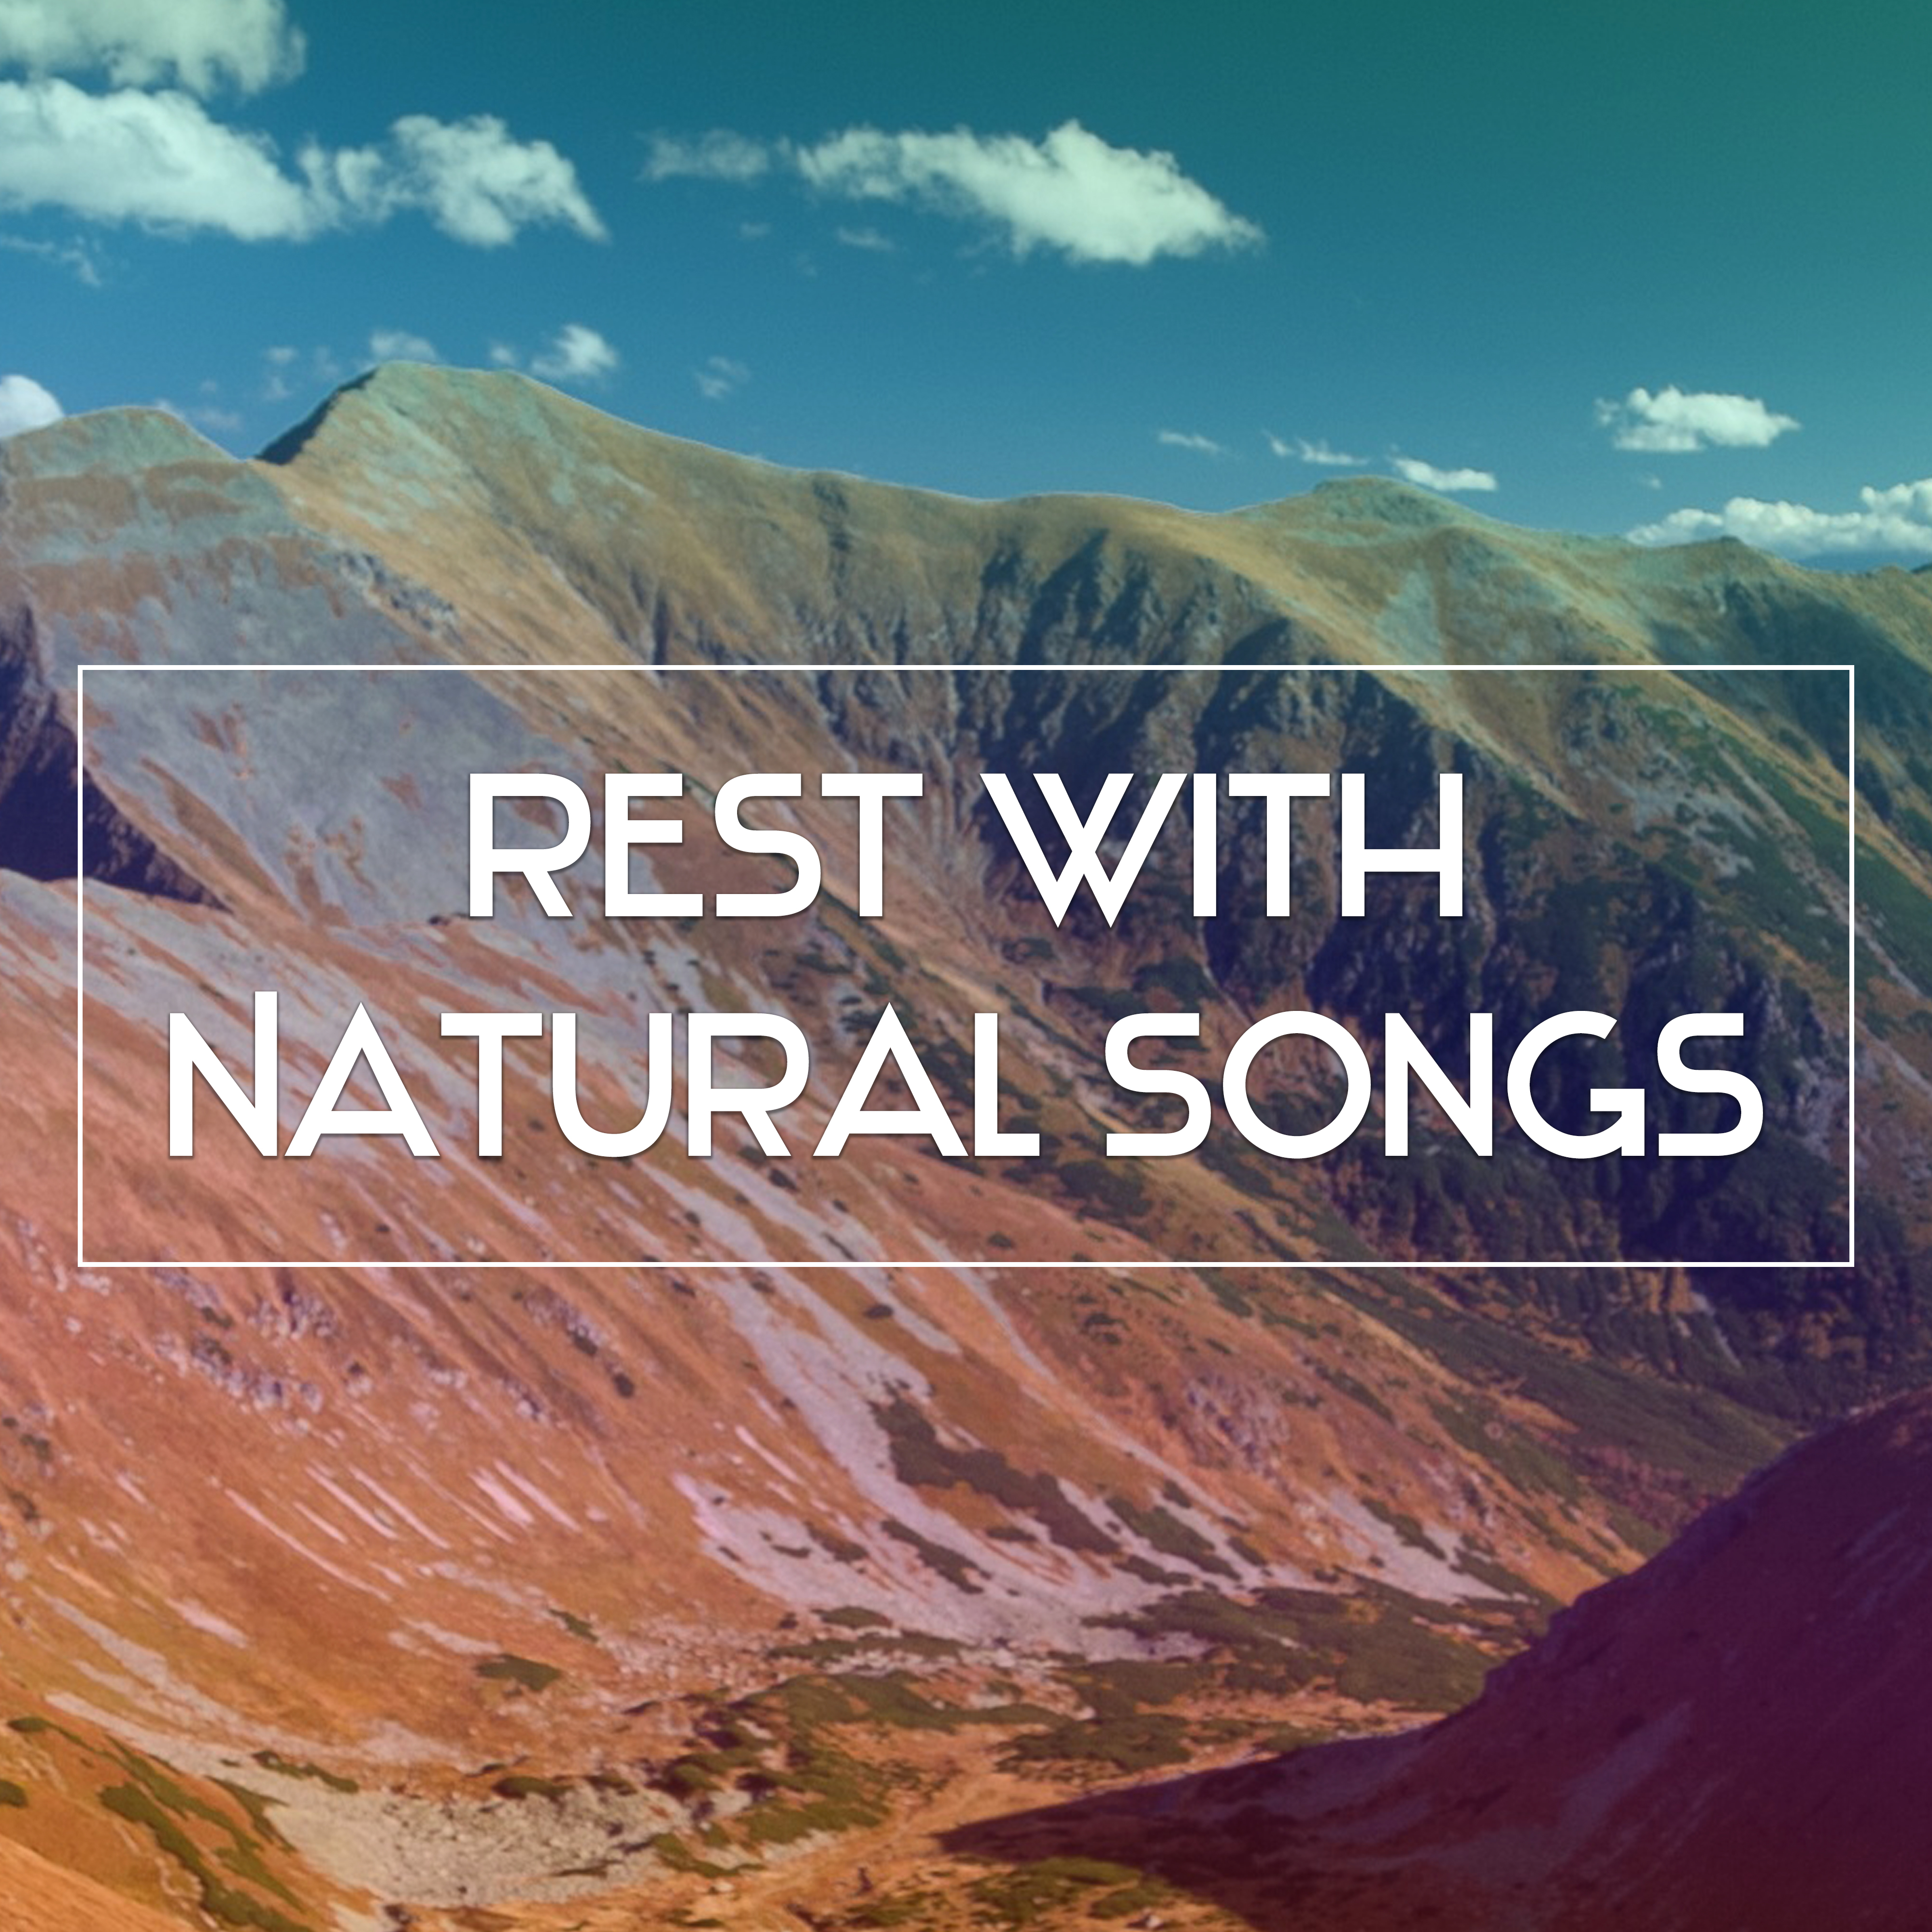 Rest with Natural Songs – Calming Sounds, Relaxing Music, Rest with Sounds of Nature